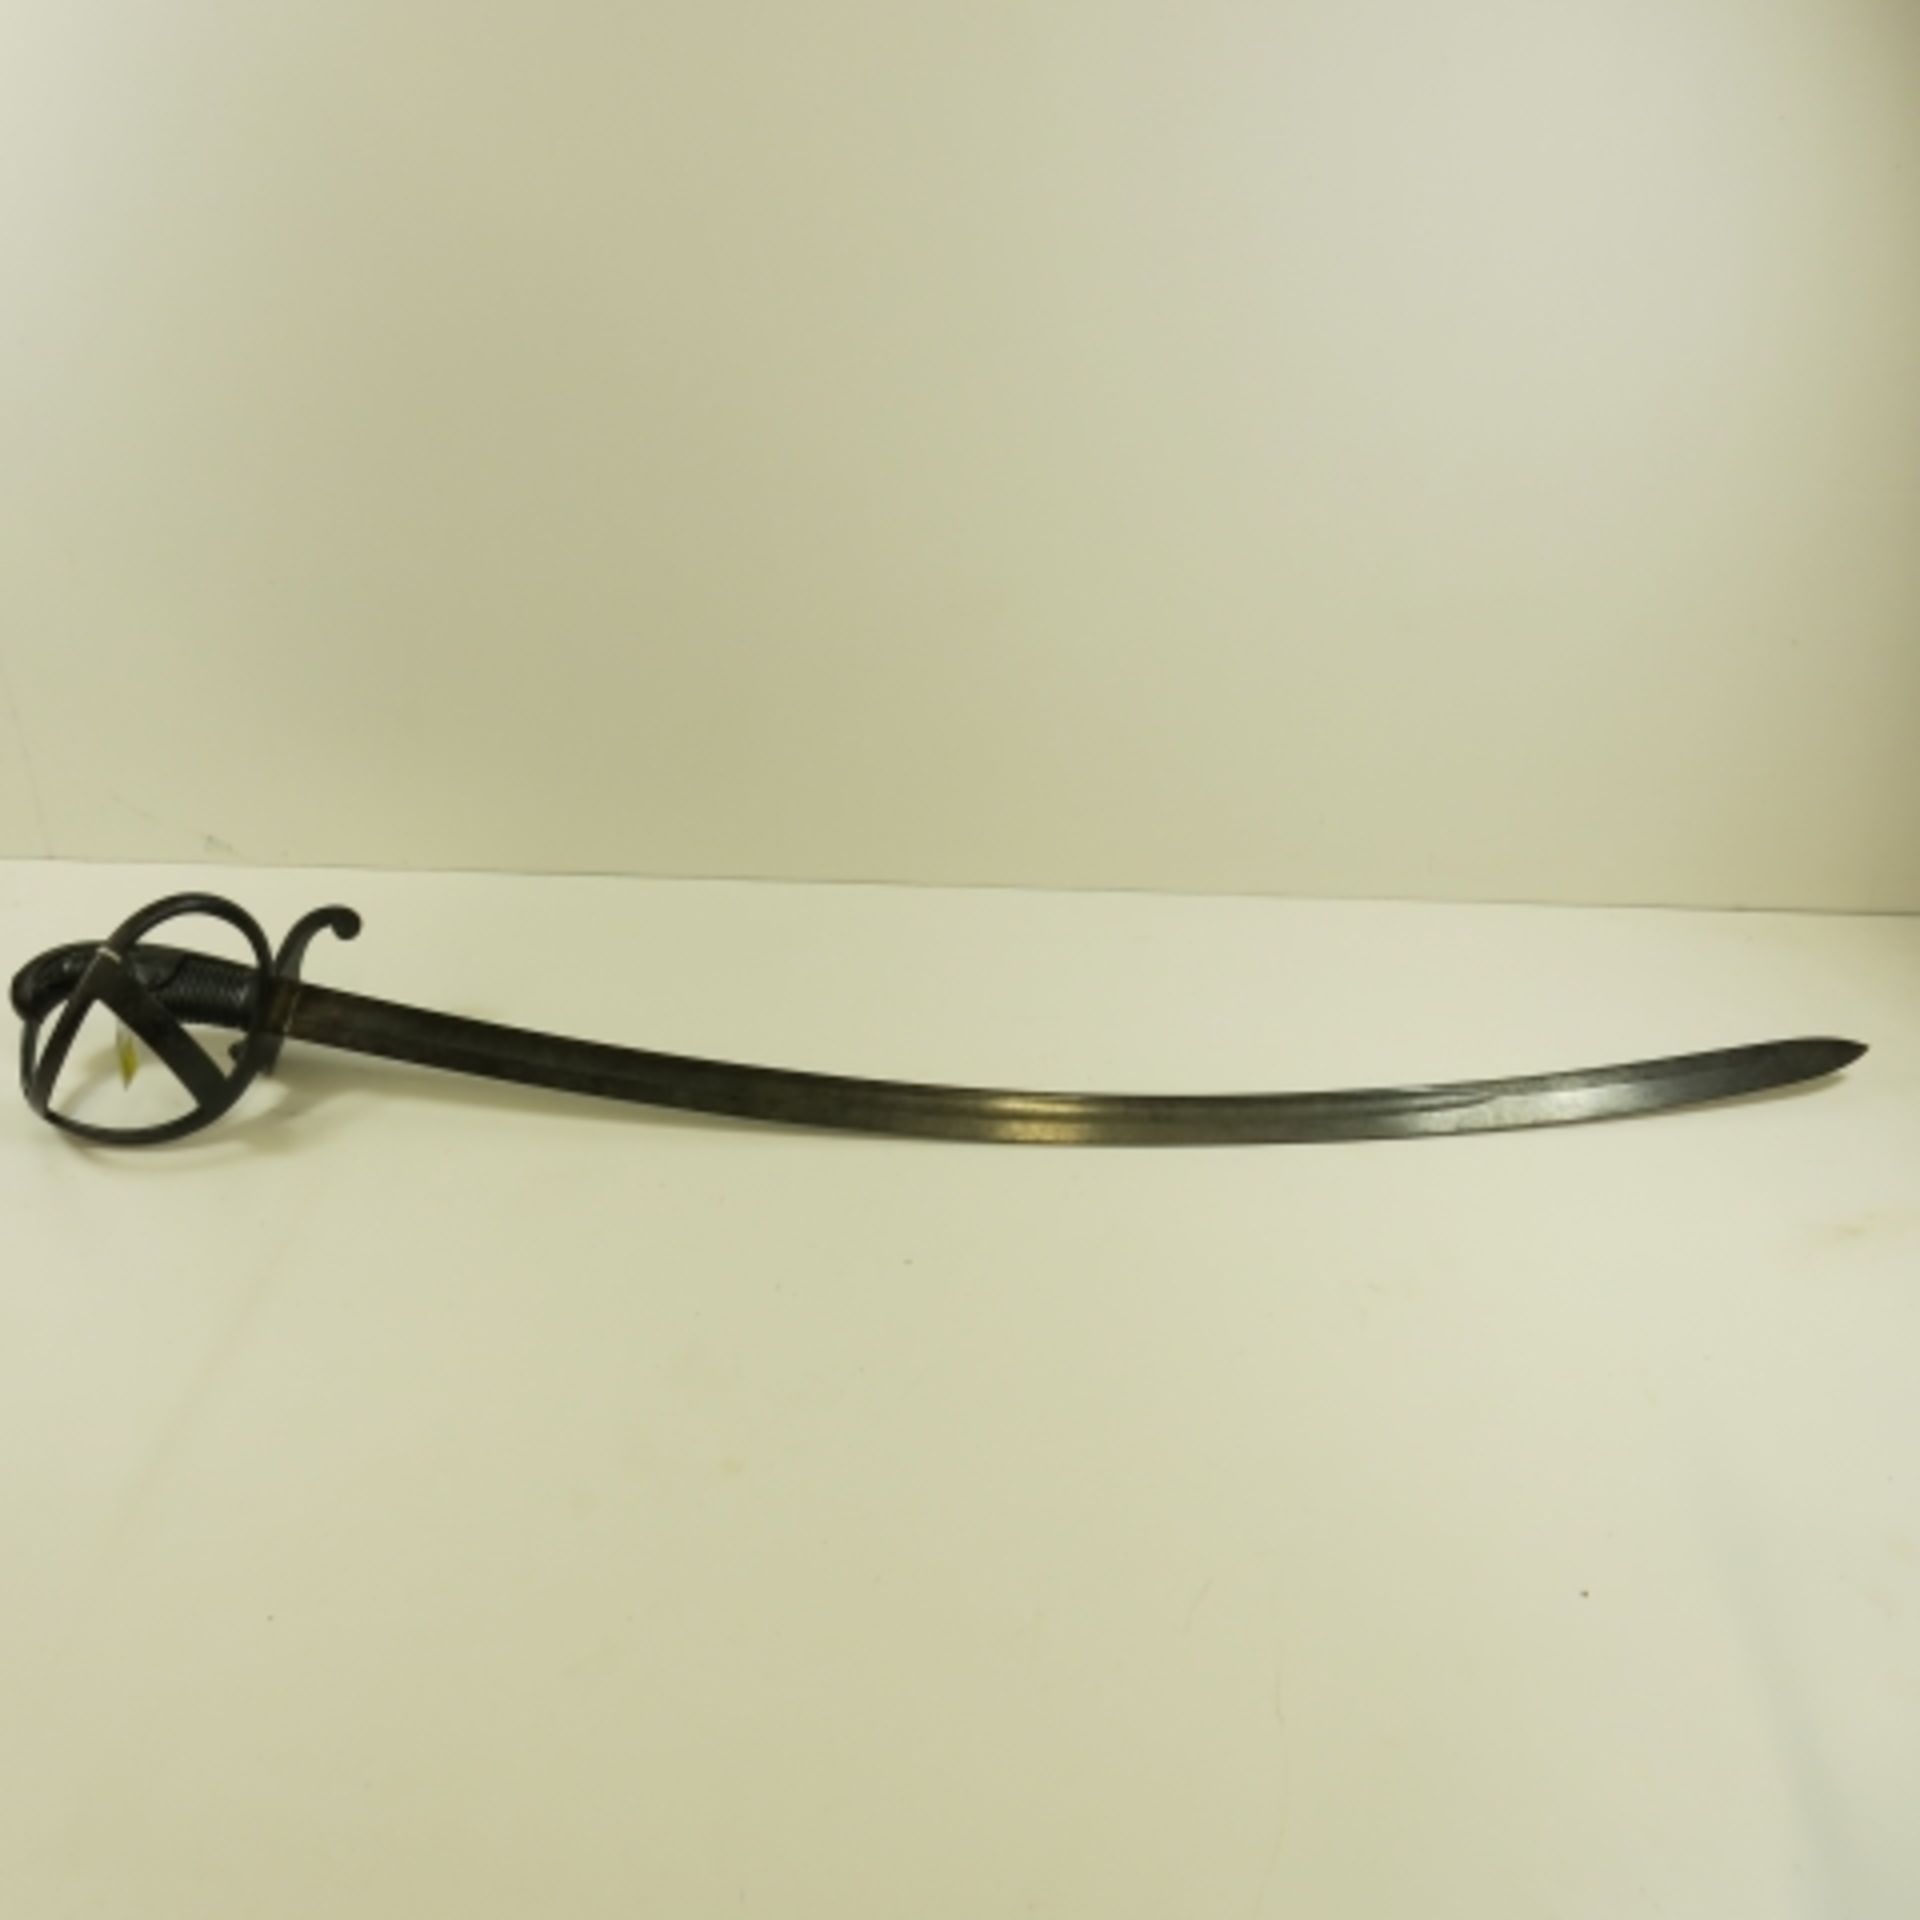 Early 20th century German Cavalry Sword, open basket with wooden grip. 90cm curved blade with